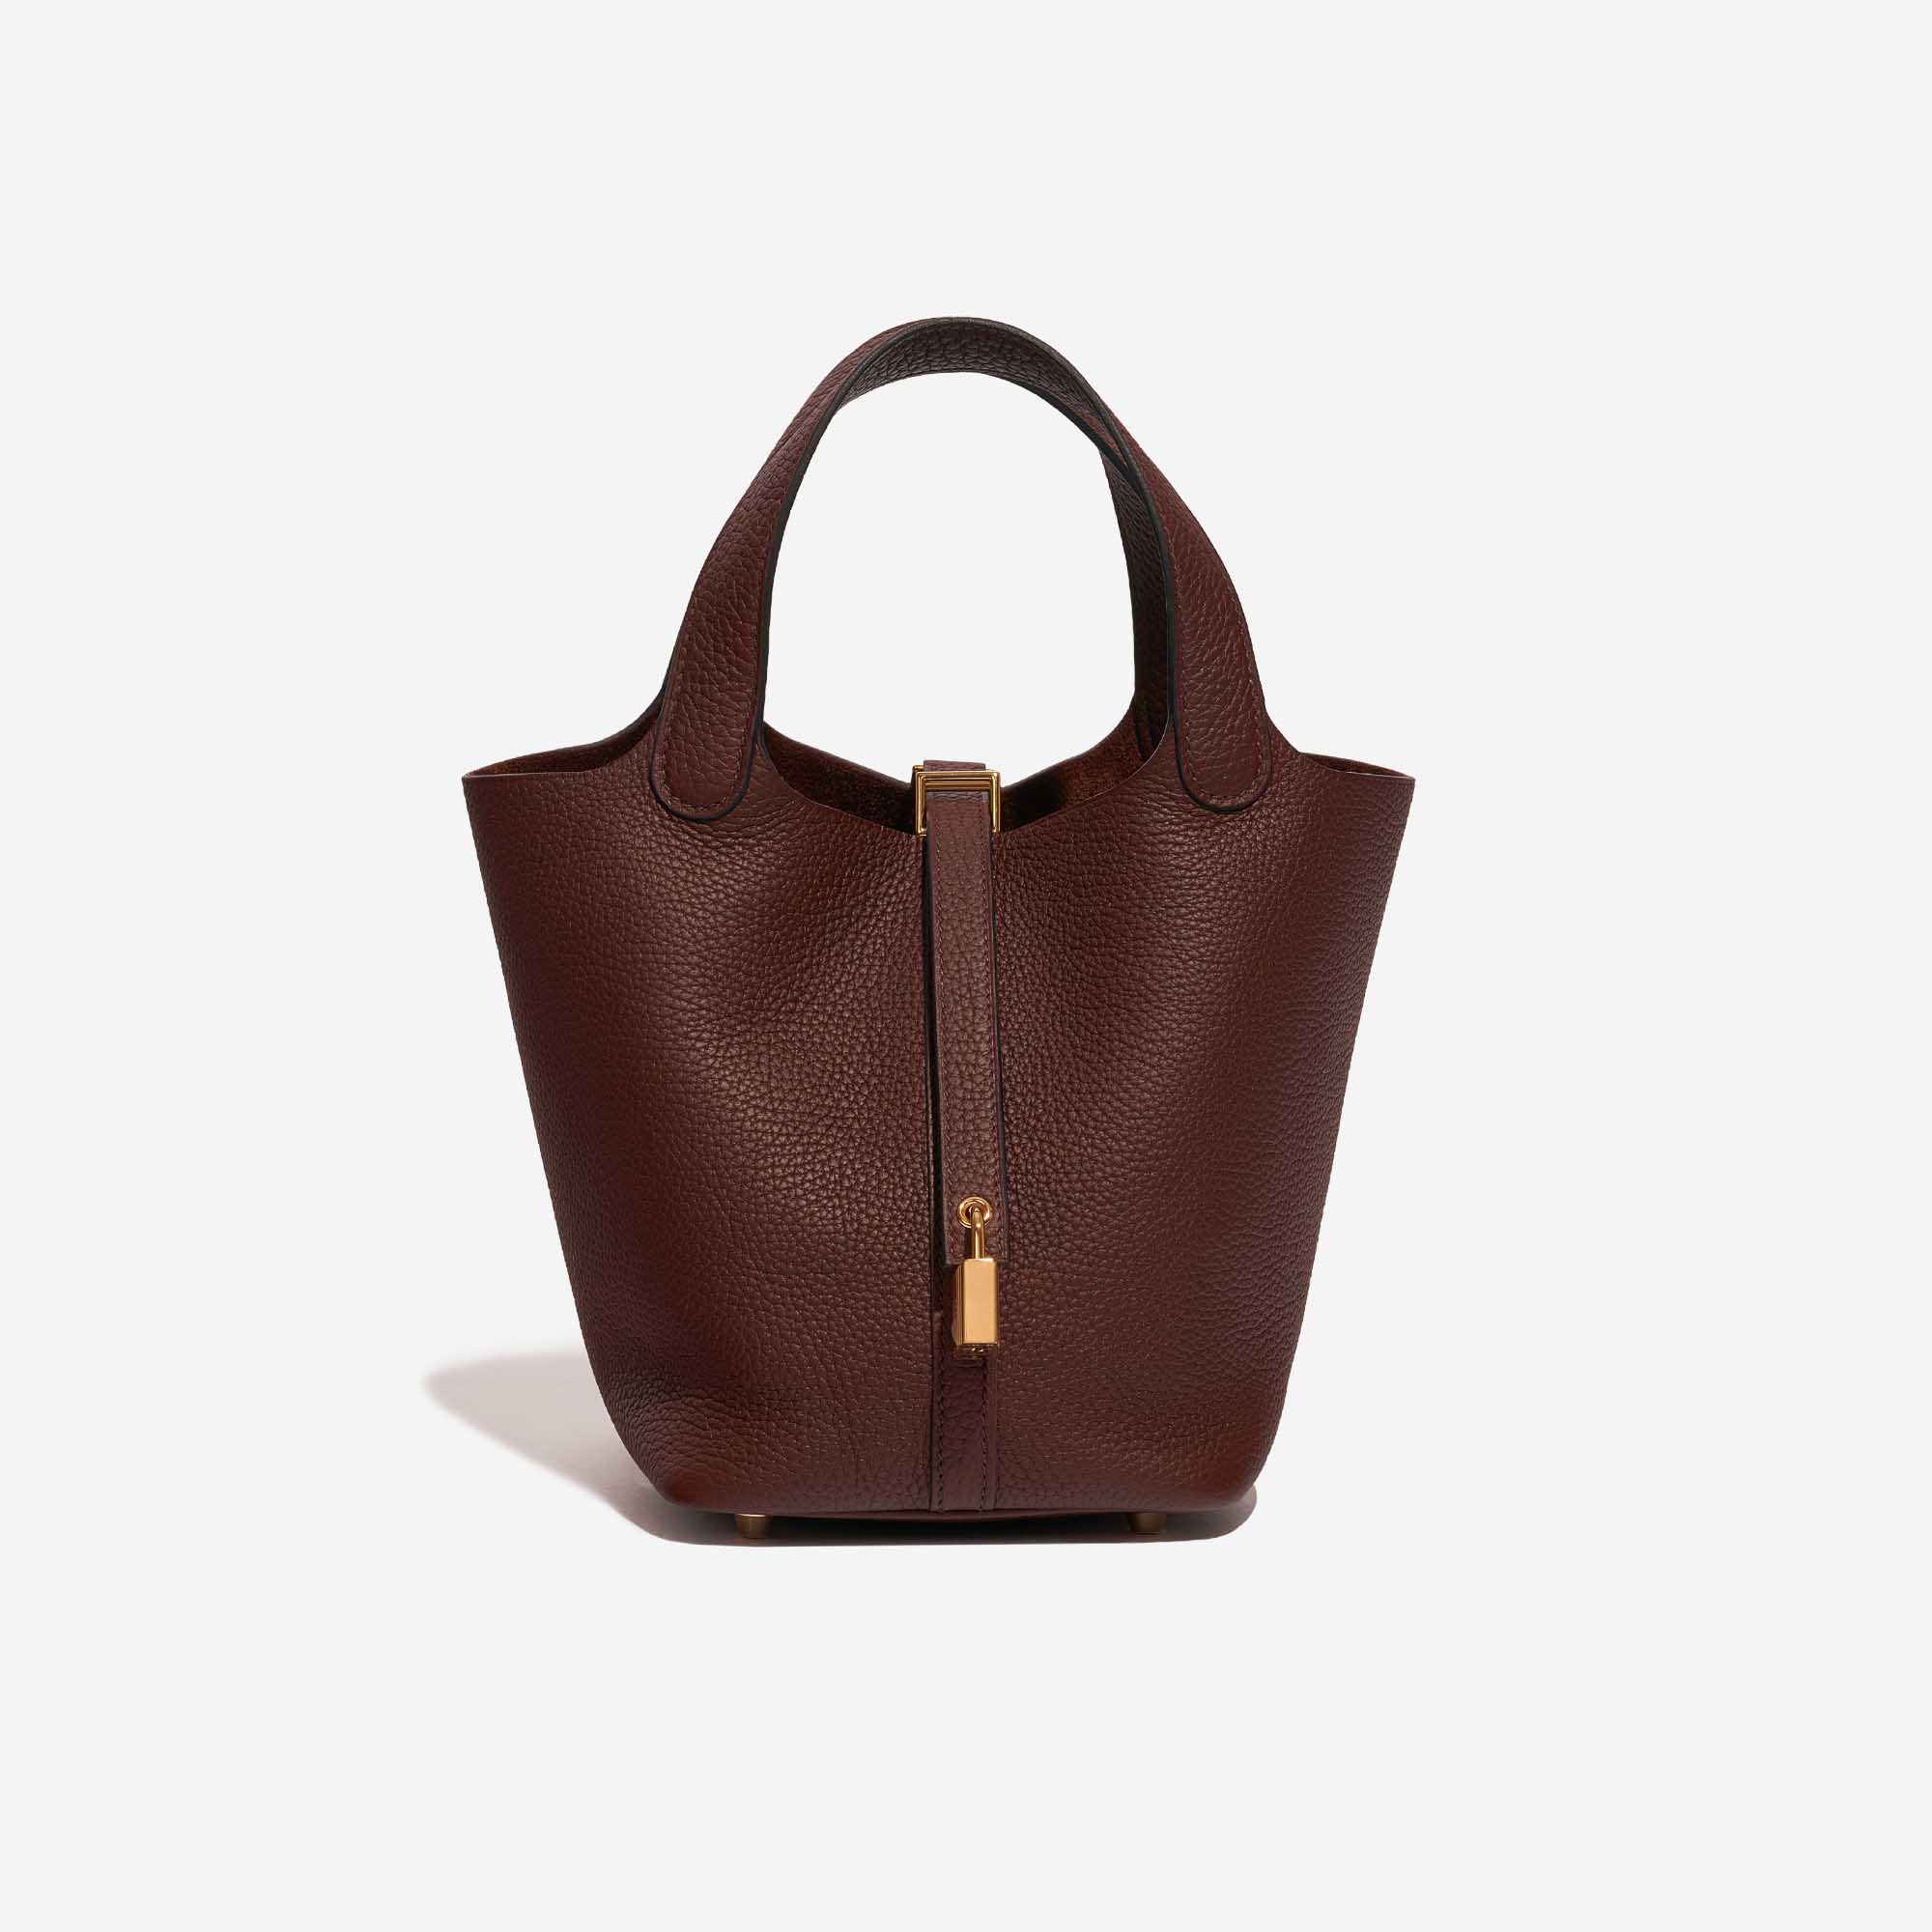 hermes picotin 18 rouge sellier